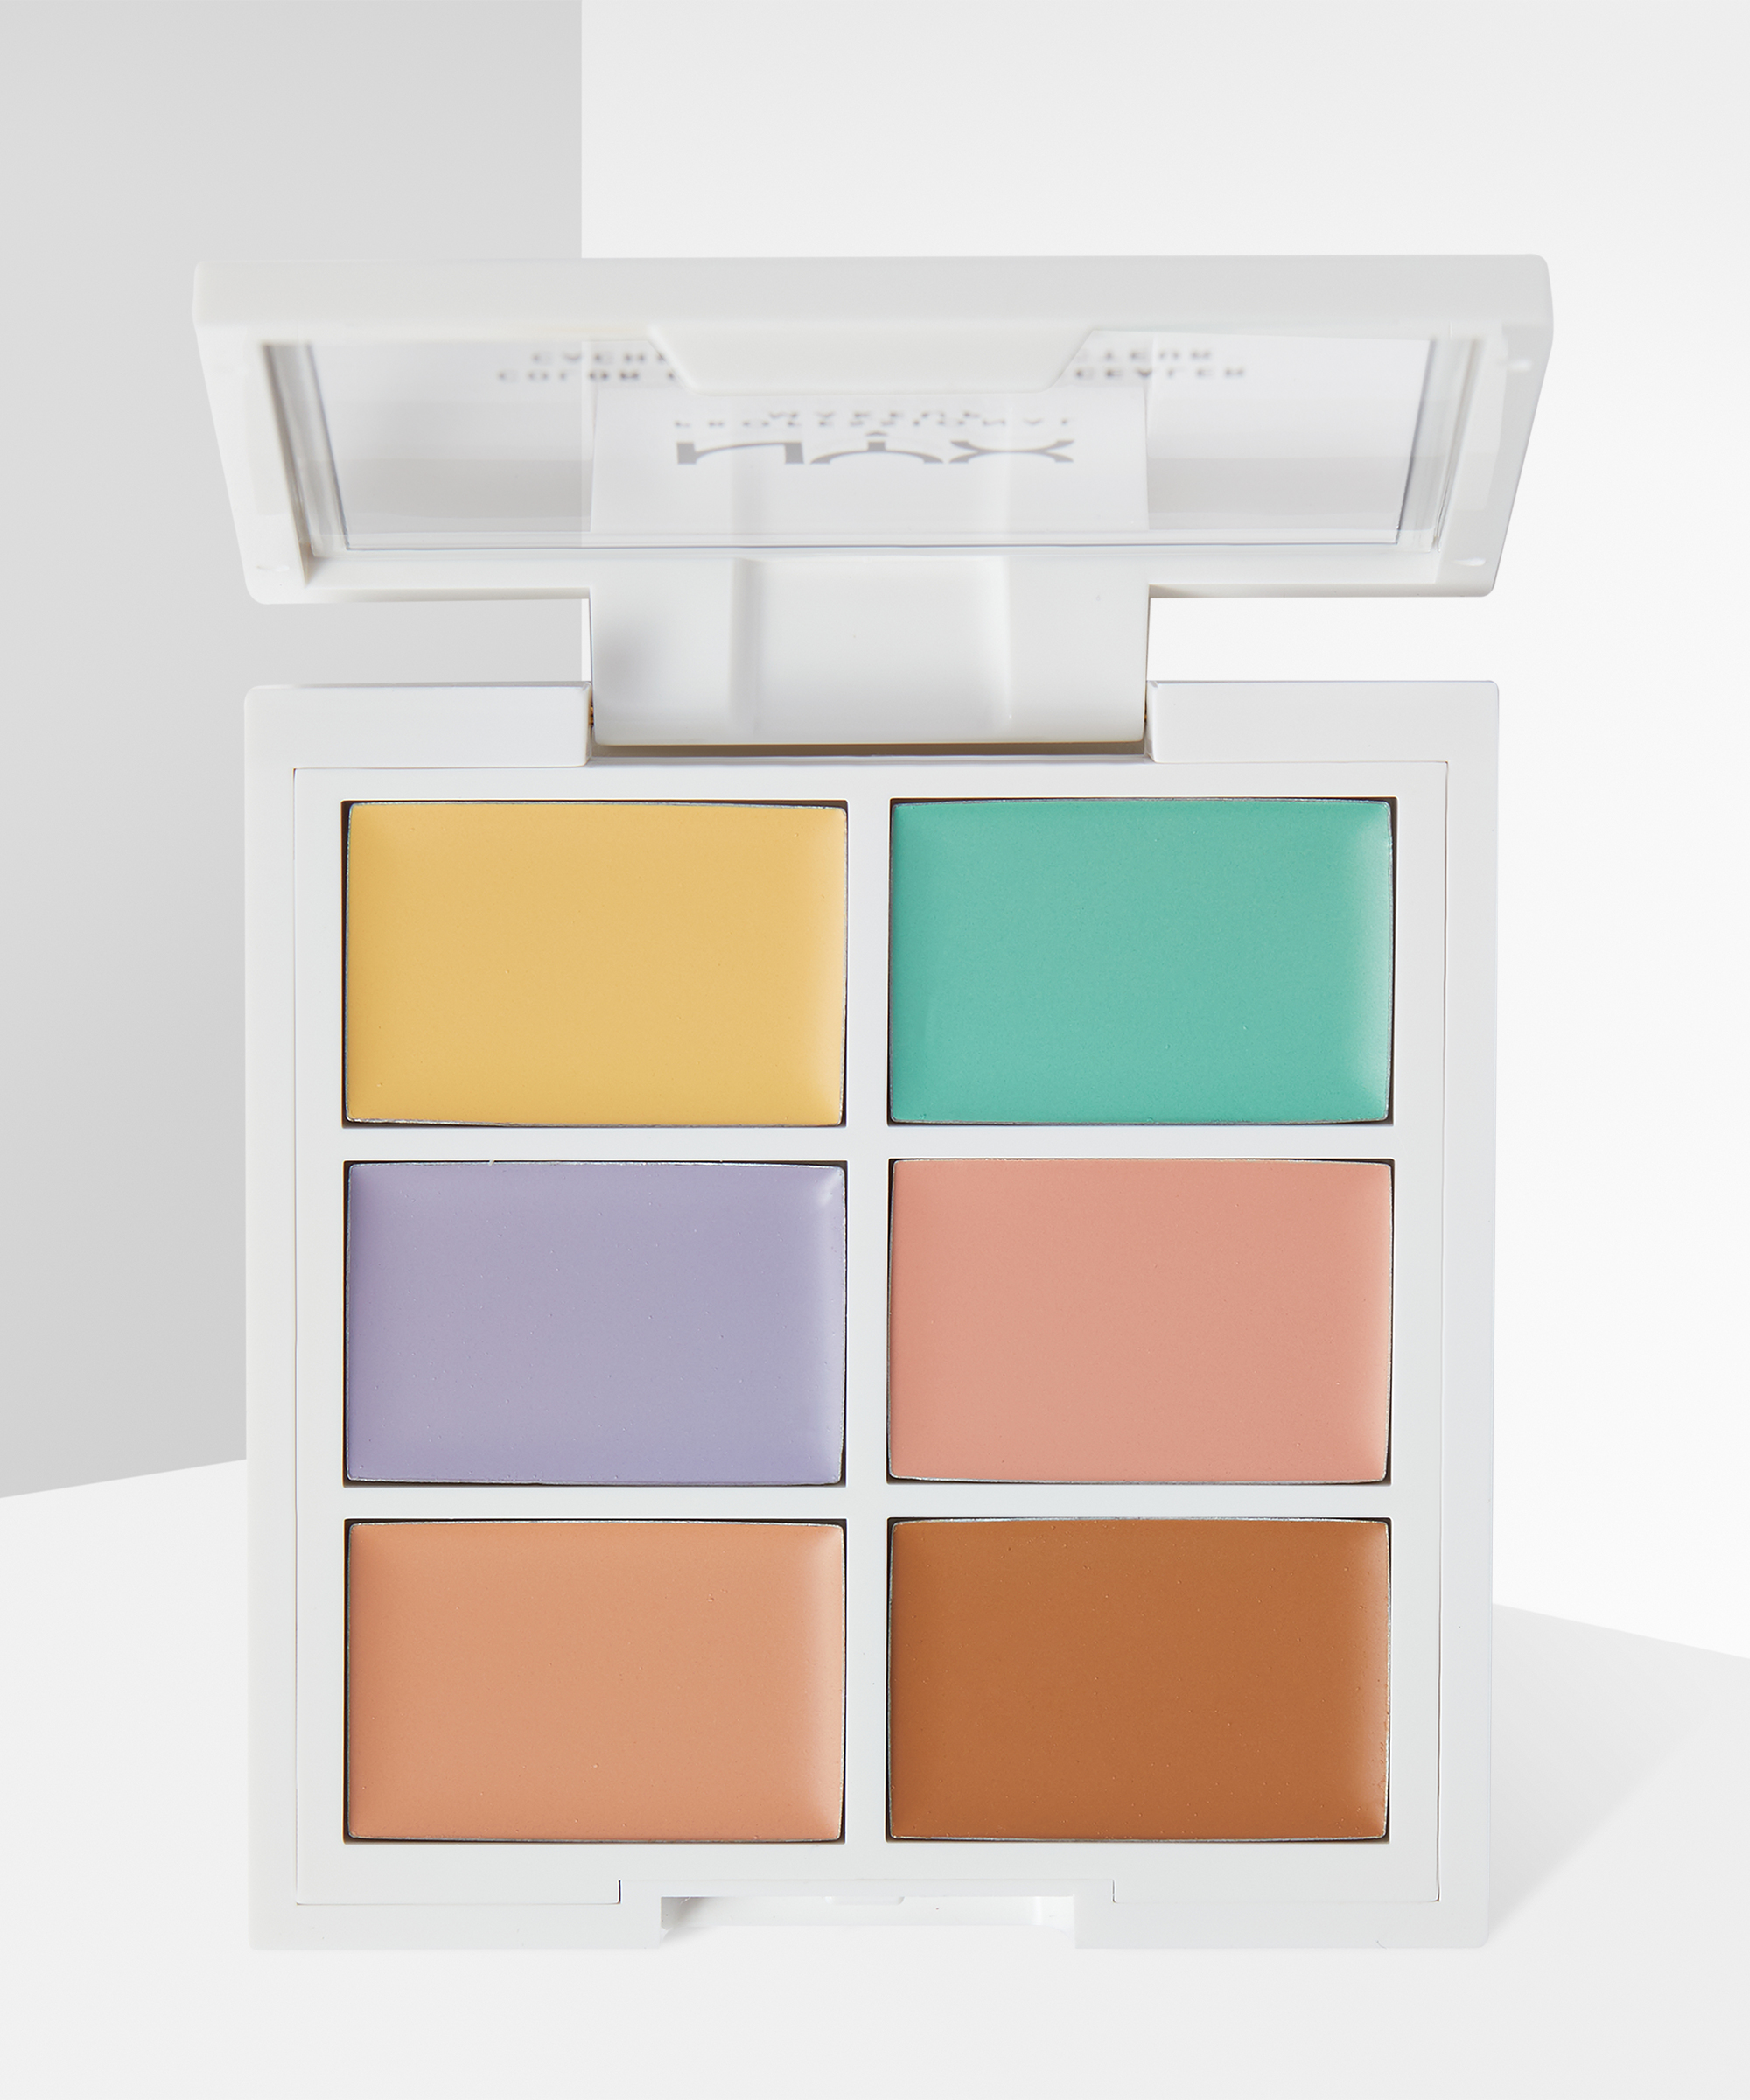 Makeup at BAY Colour Correcting Professional NYX BEAUTY Palette